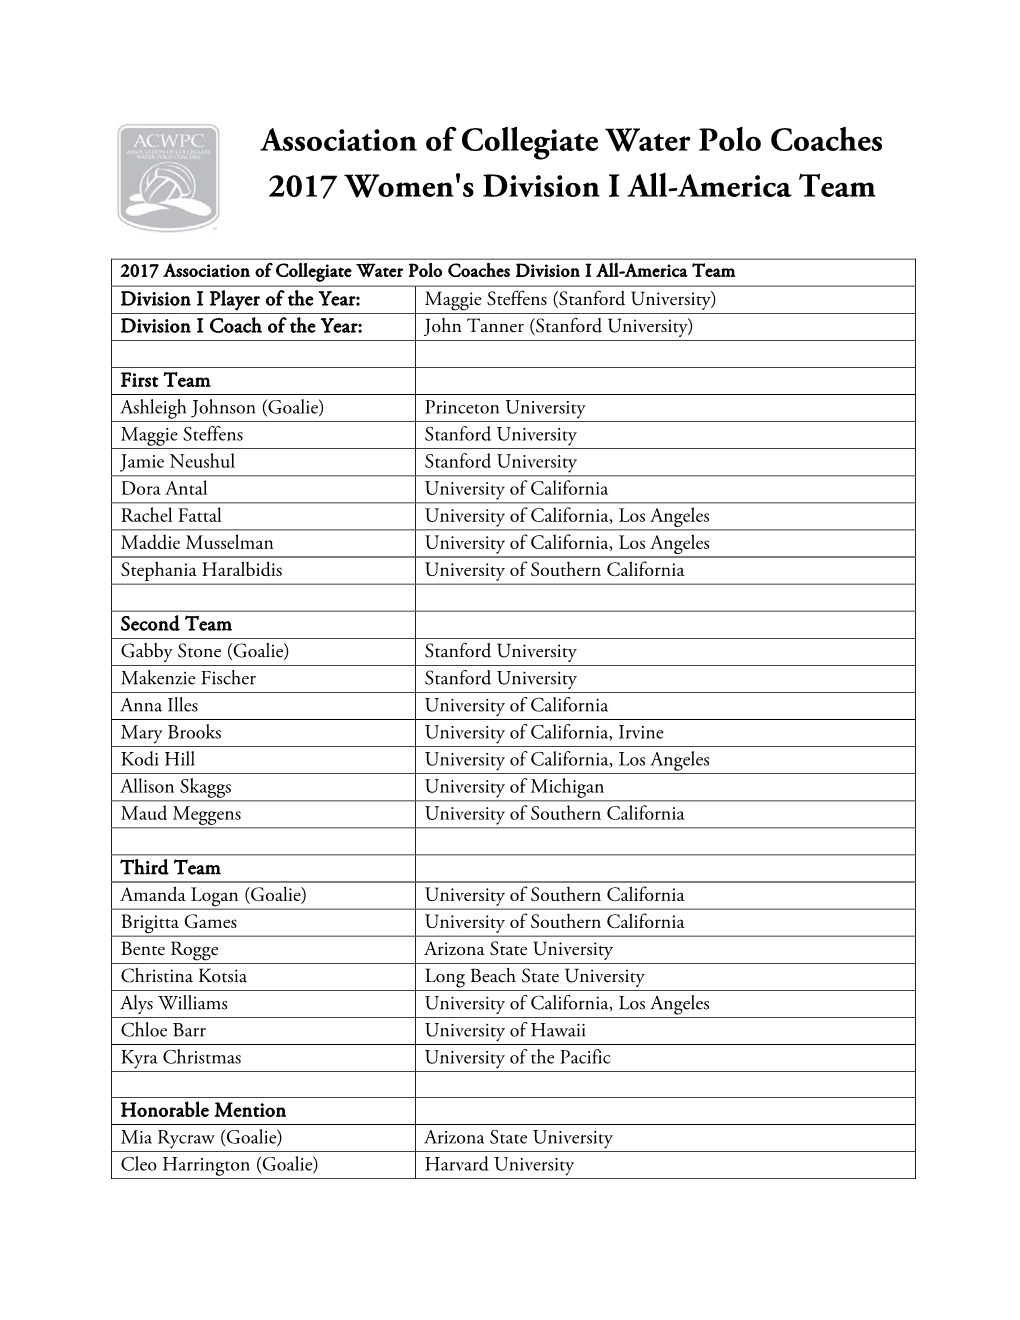 Association of Collegiate Water Polo Coaches 2017 Women's Division I All-America Team